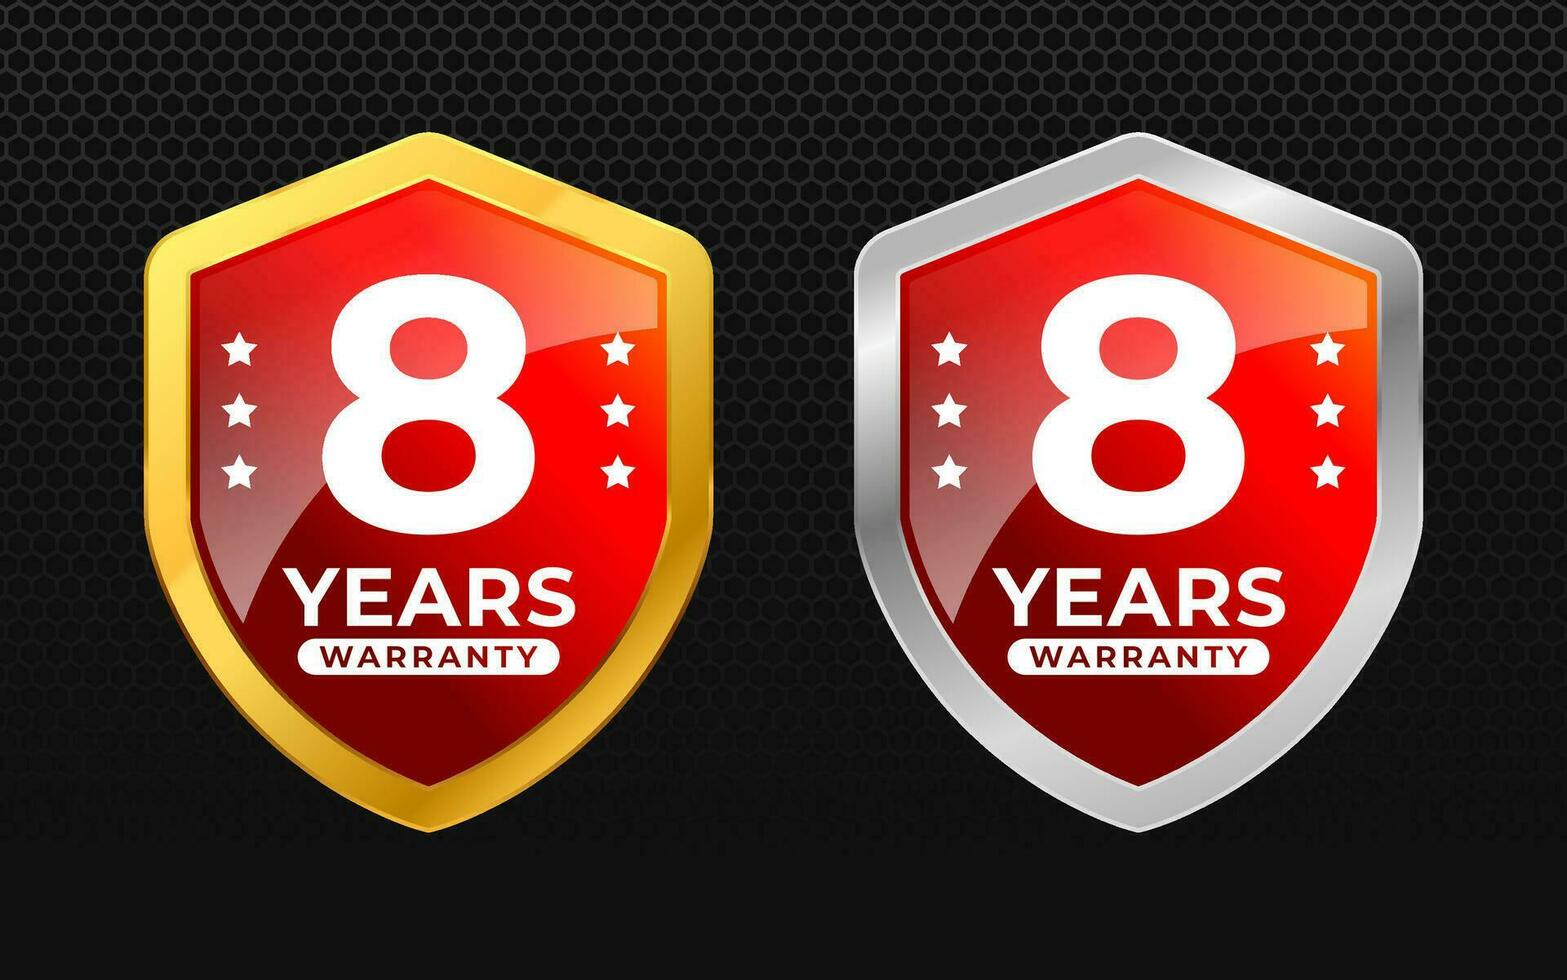 8 years warranty with glossy gold and silver vector shield shape. for label, seal, stamp, icon, logo, badge, symbol, sticker, button